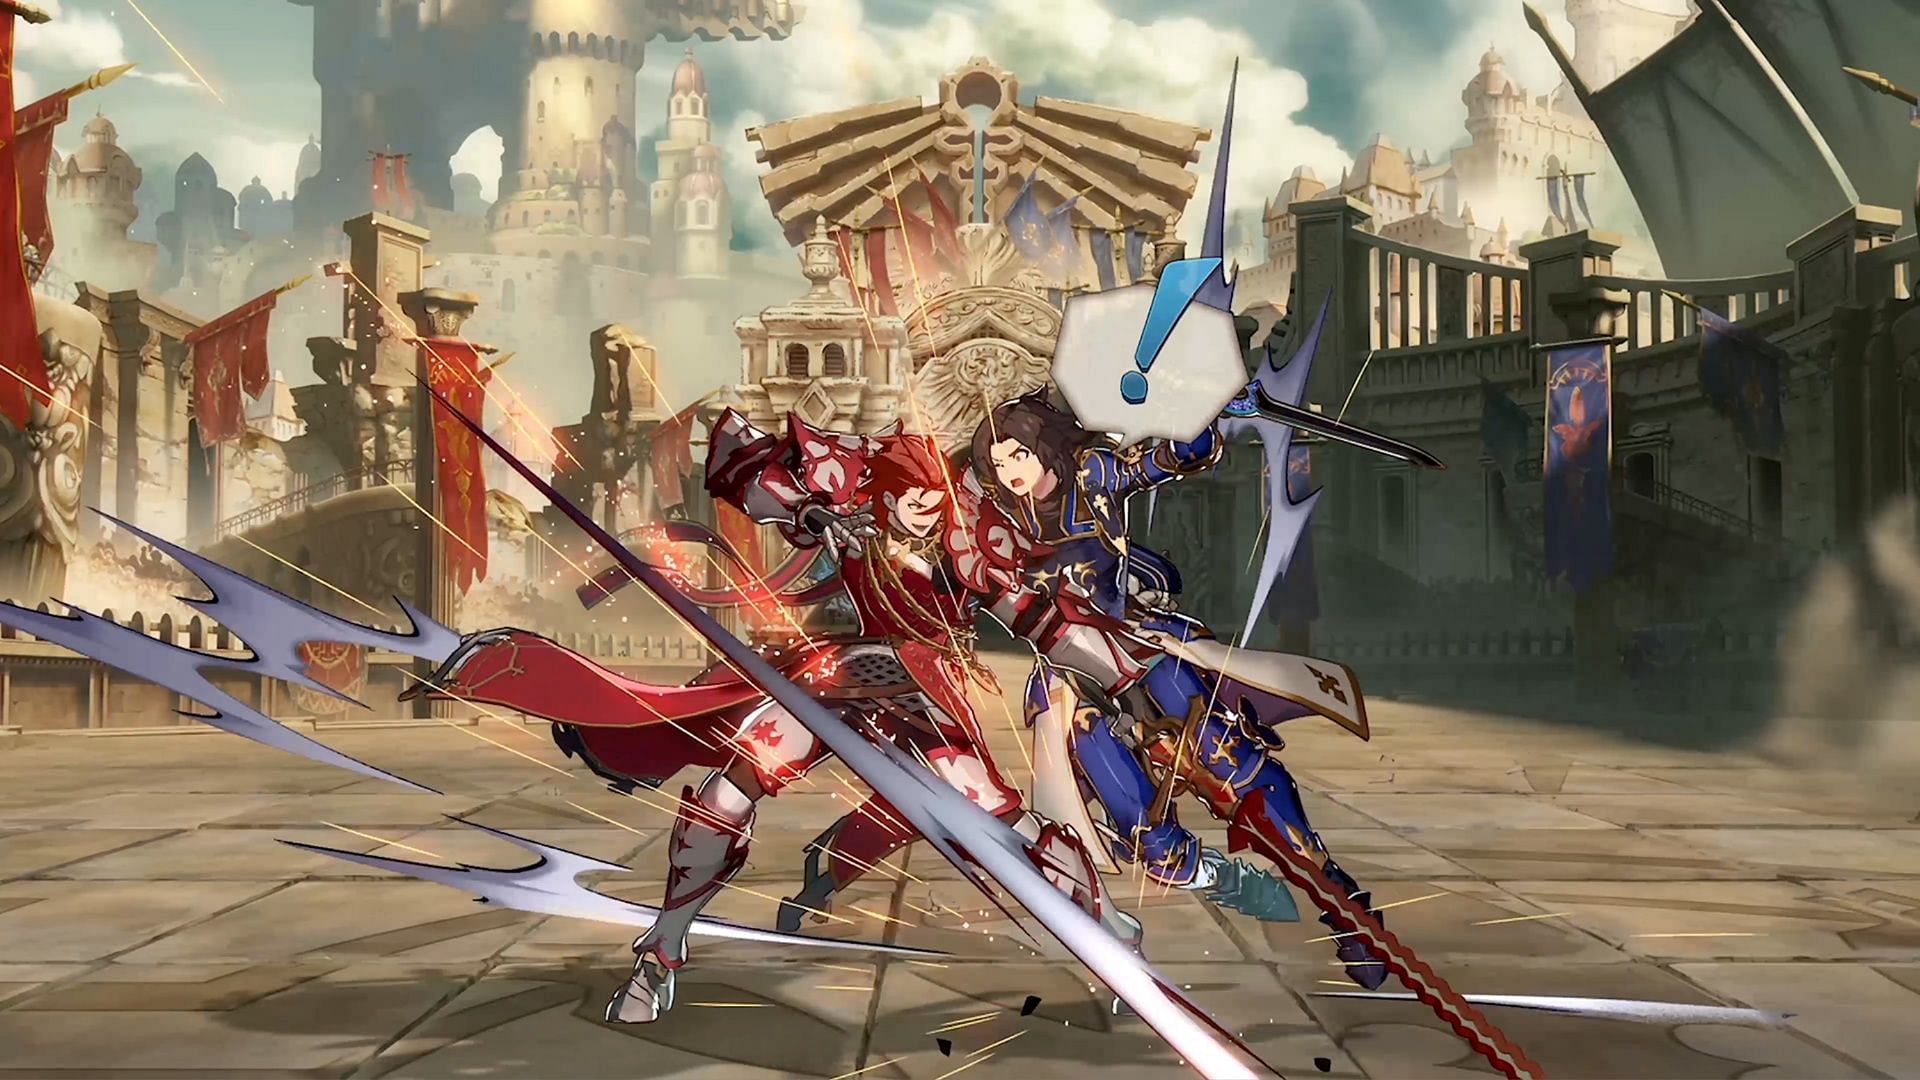 Granblue Fantasy Versus: Rising Reveals New Character And Online Beta Date